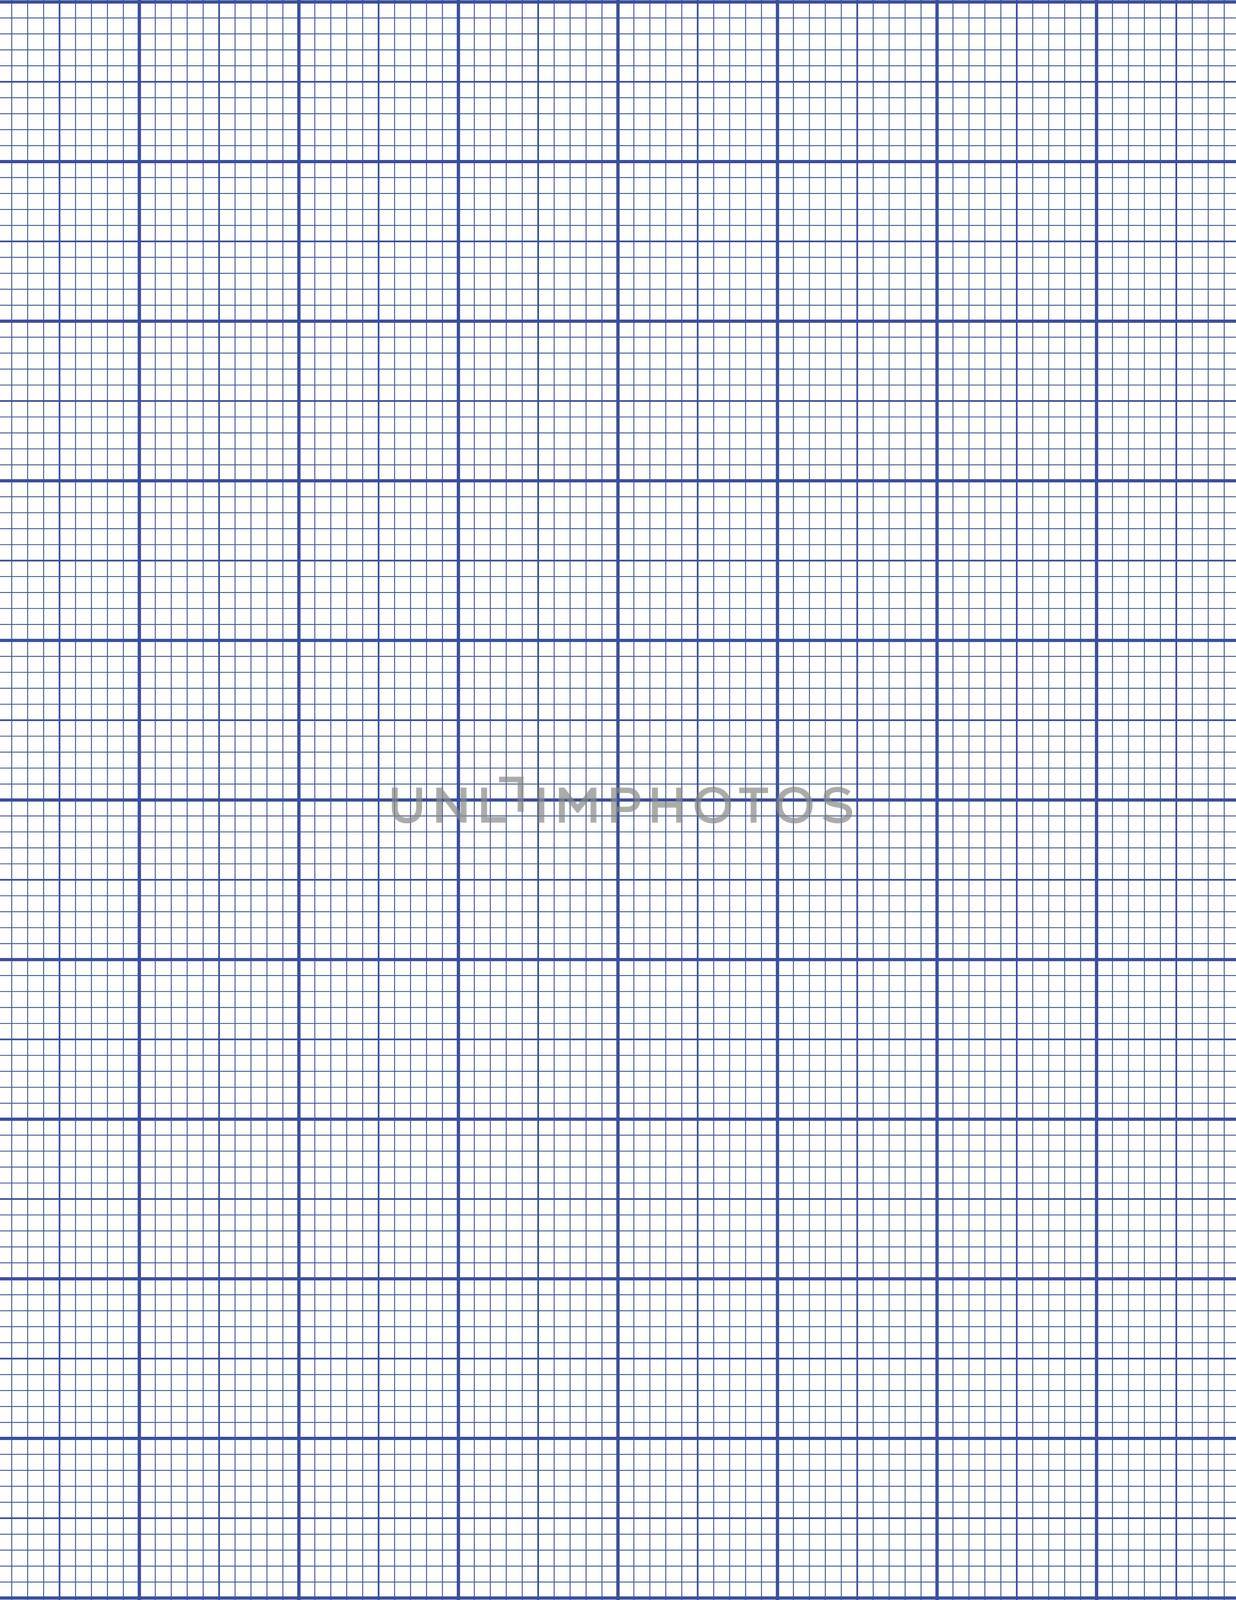 Graph paper. Printable millimeter grid paper with color lines. Geometric pattern for school, technical engineering line scale measurement. Realistic lined paper blank size Letter by allaku